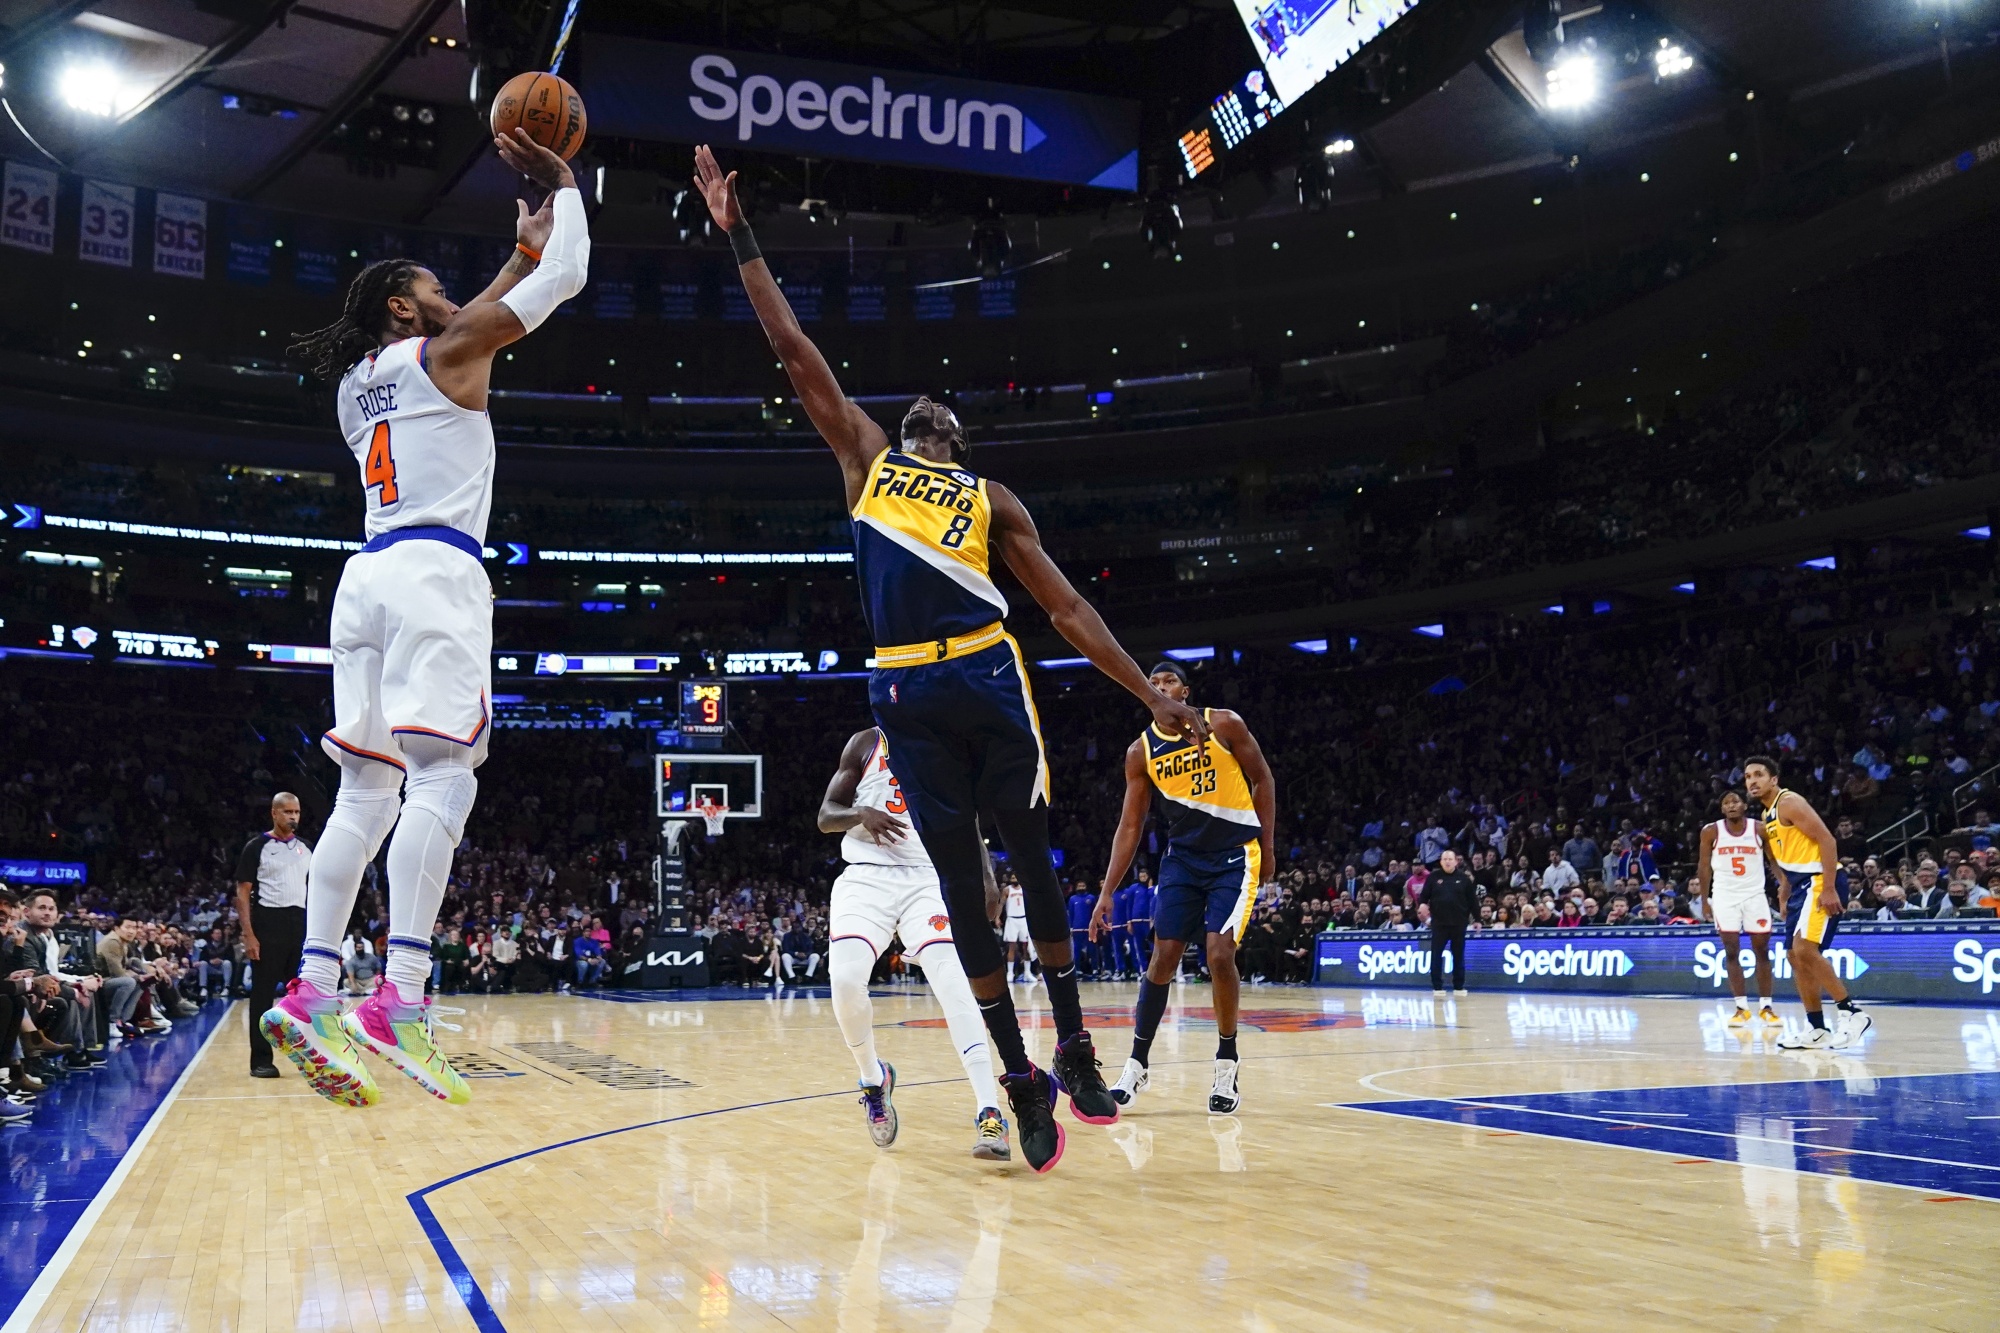 Knicks Limit Pacers to 2 Baskets in 4th Quarter, Win 9284 Bloomberg